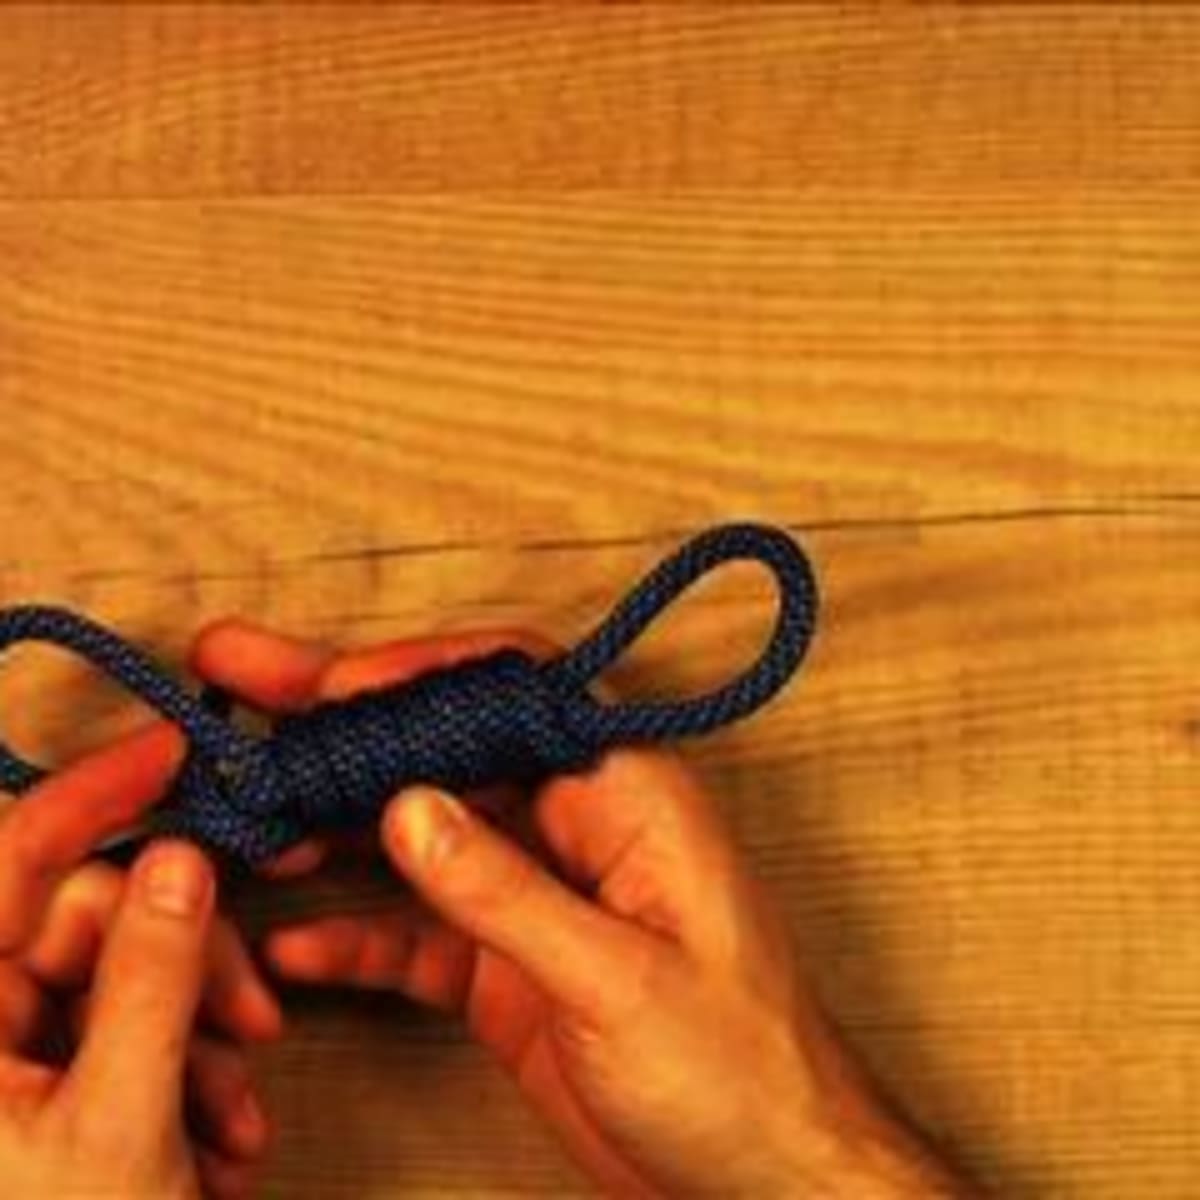 How to Tie a Hangman's Noose Knot - Howcast